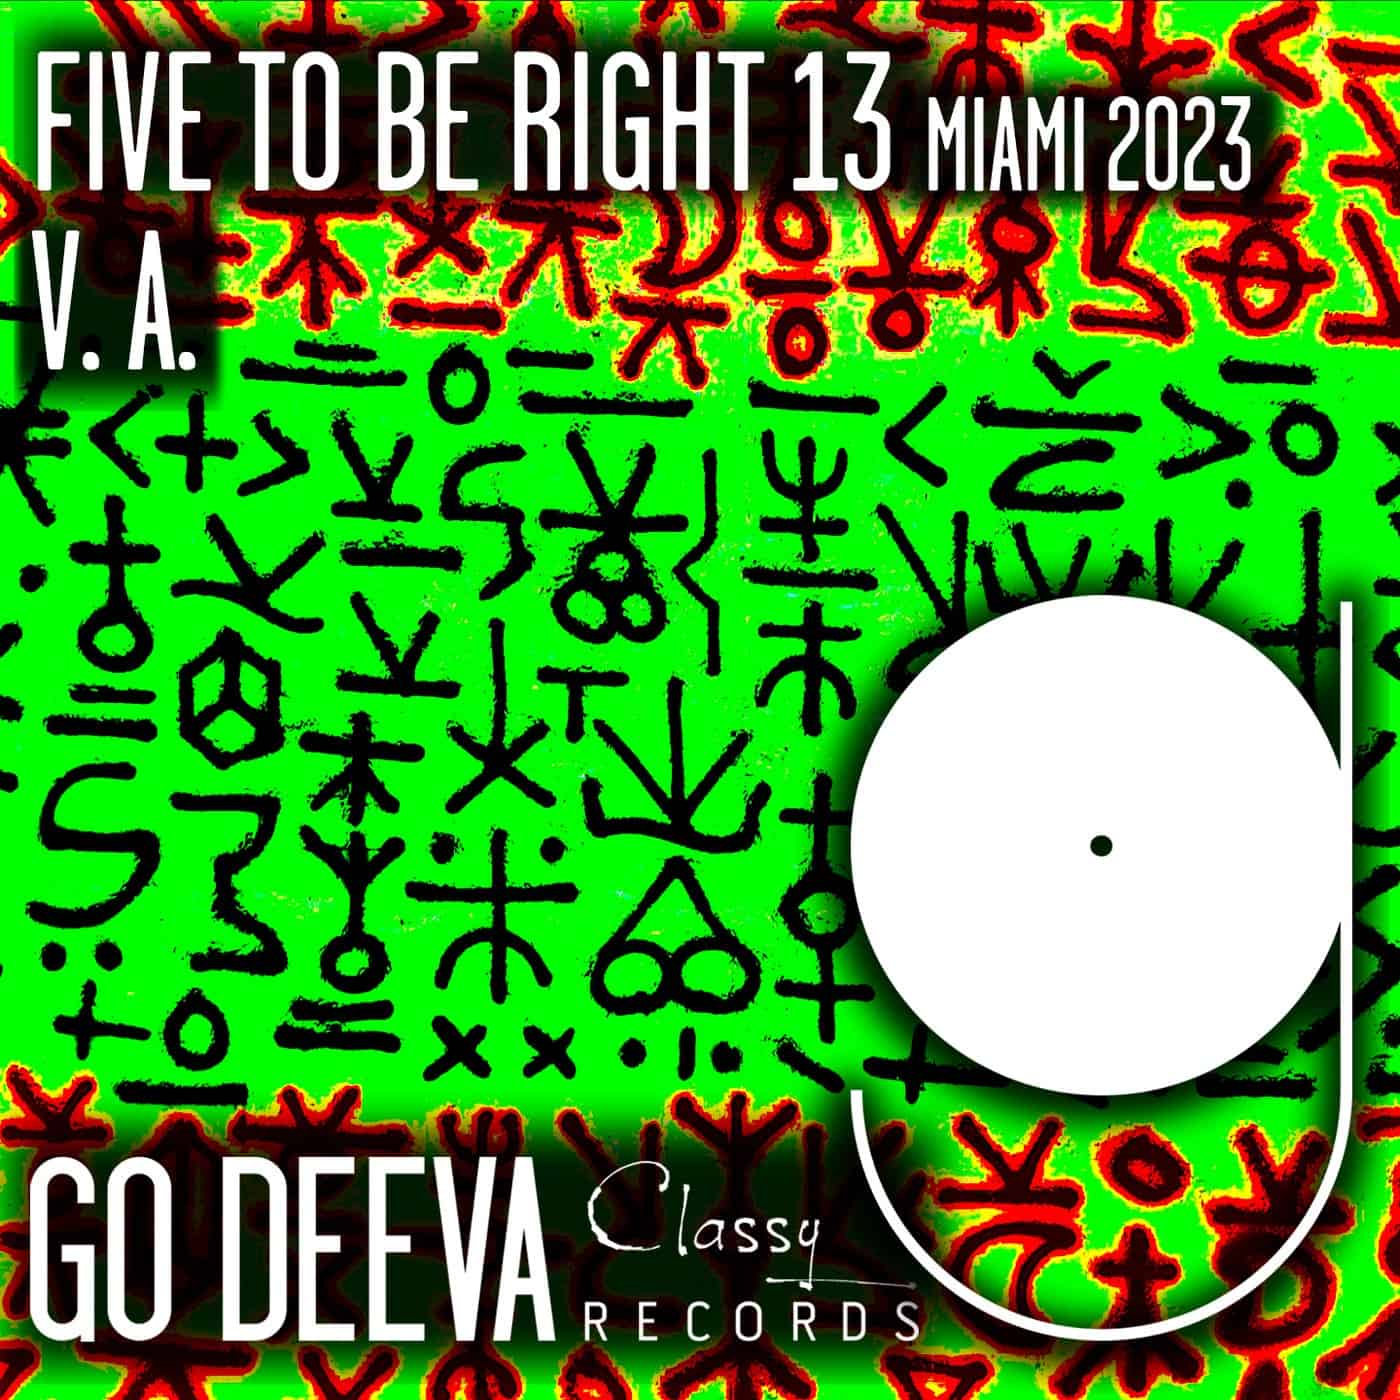 Download VA - FIVE TO BE RIGHT 13 Miami 2023 on Electrobuzz